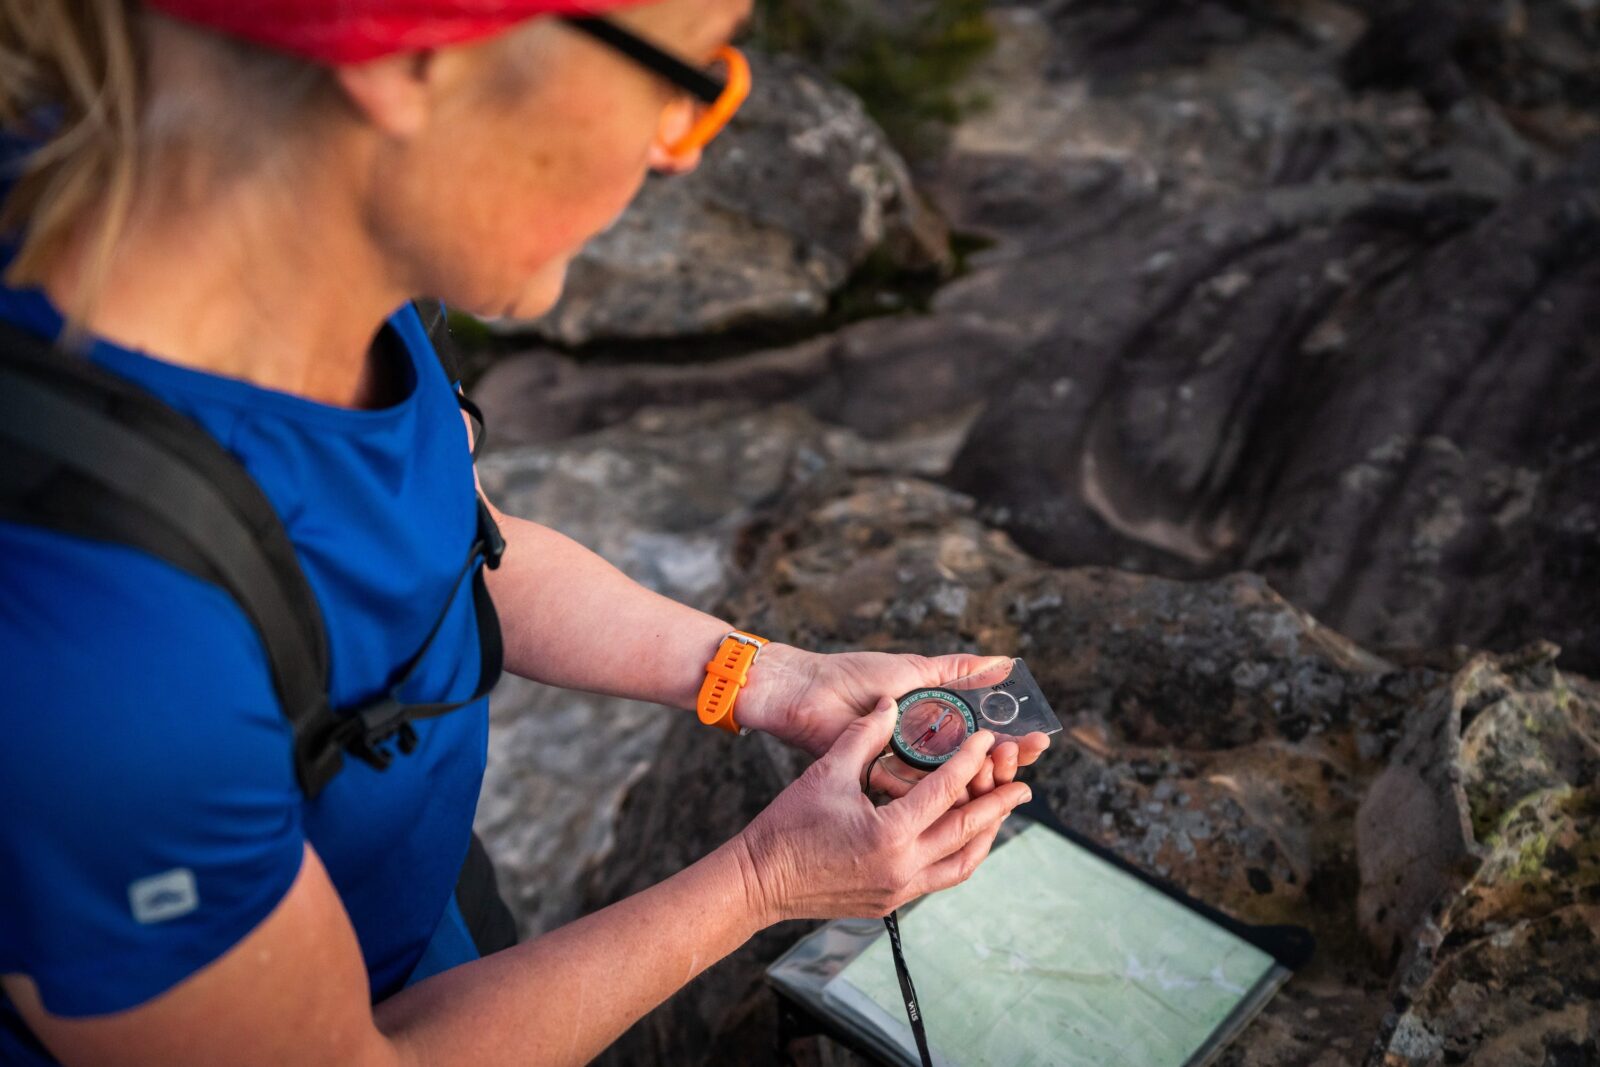 Woman adjusts compass with topographic map in background